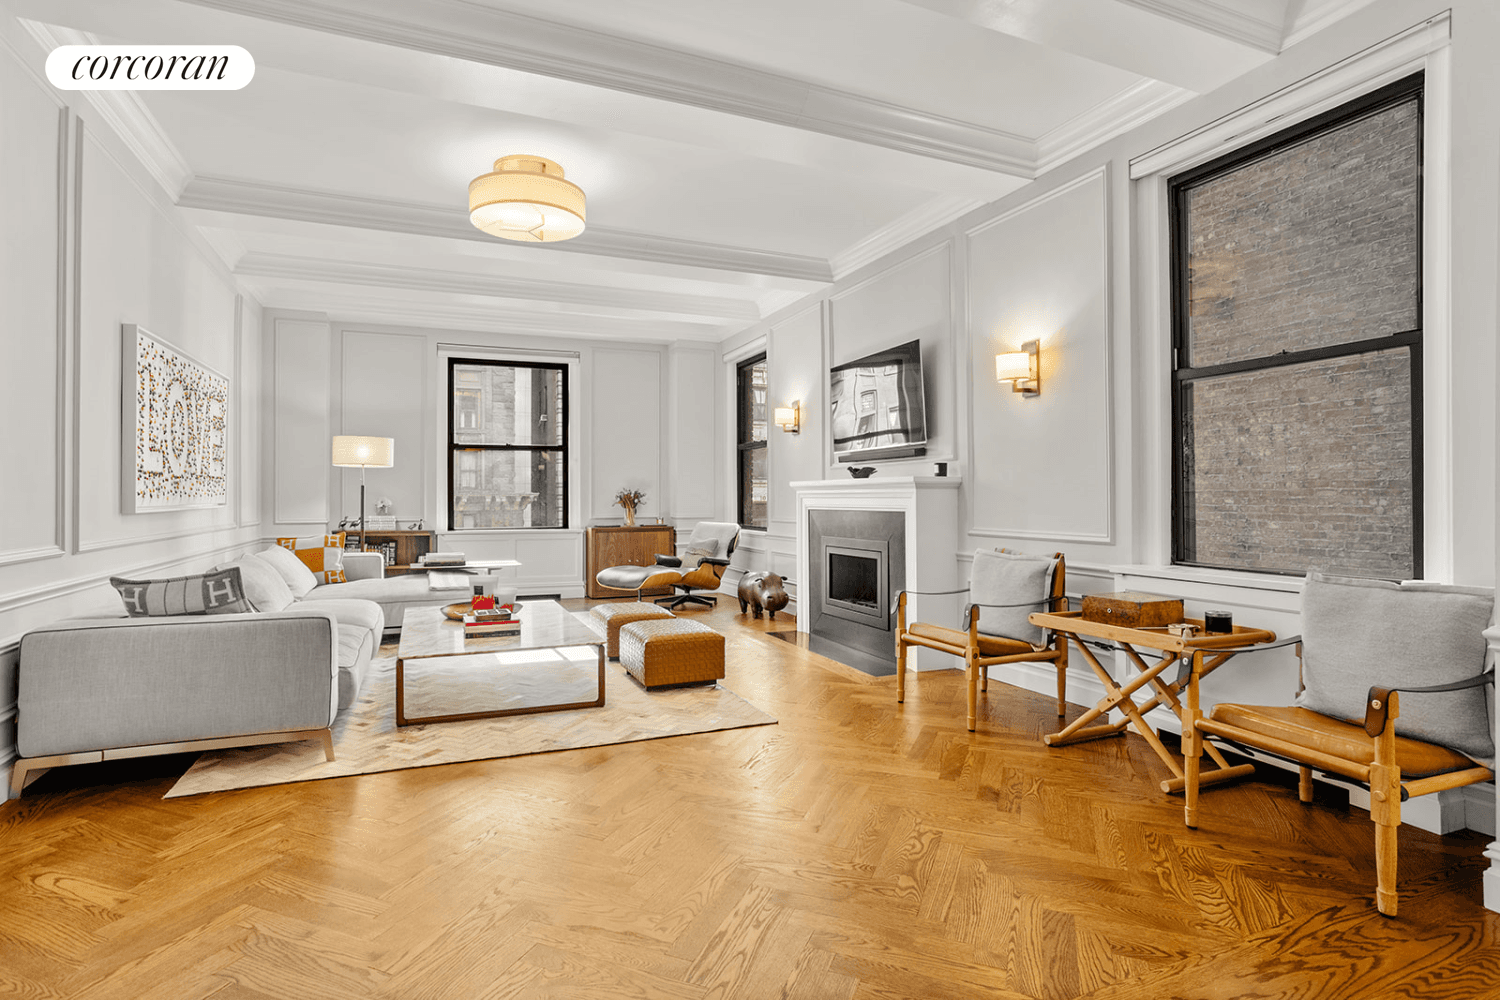 Introducing a sophisticated gem situated in the middle of Billionaires Row one block away from Central Park Residence 9A at 171 West 57th Street.